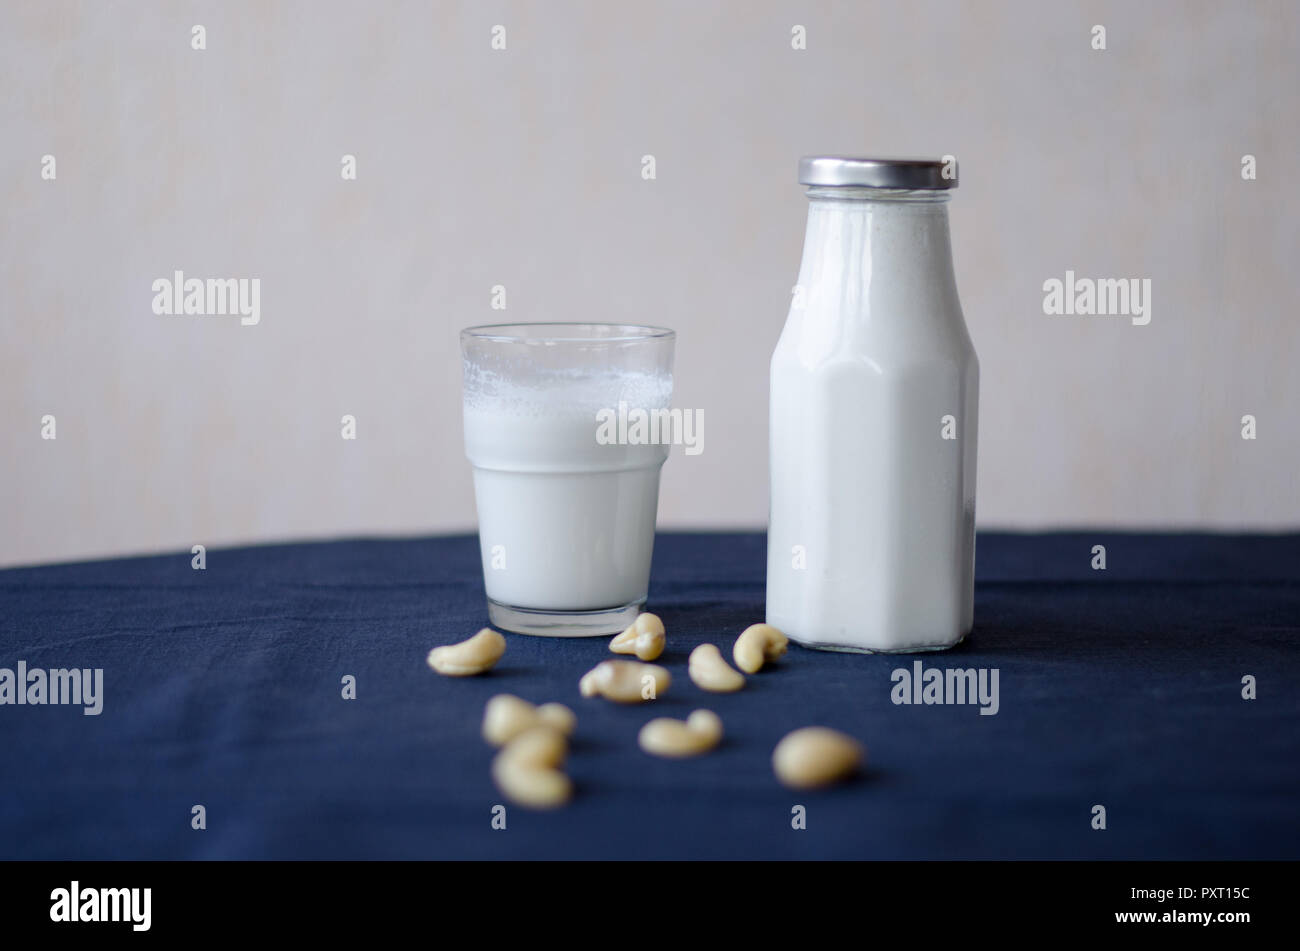 Cashew nut milk bottle and glass standing together with ingredients in front. Stock Photo